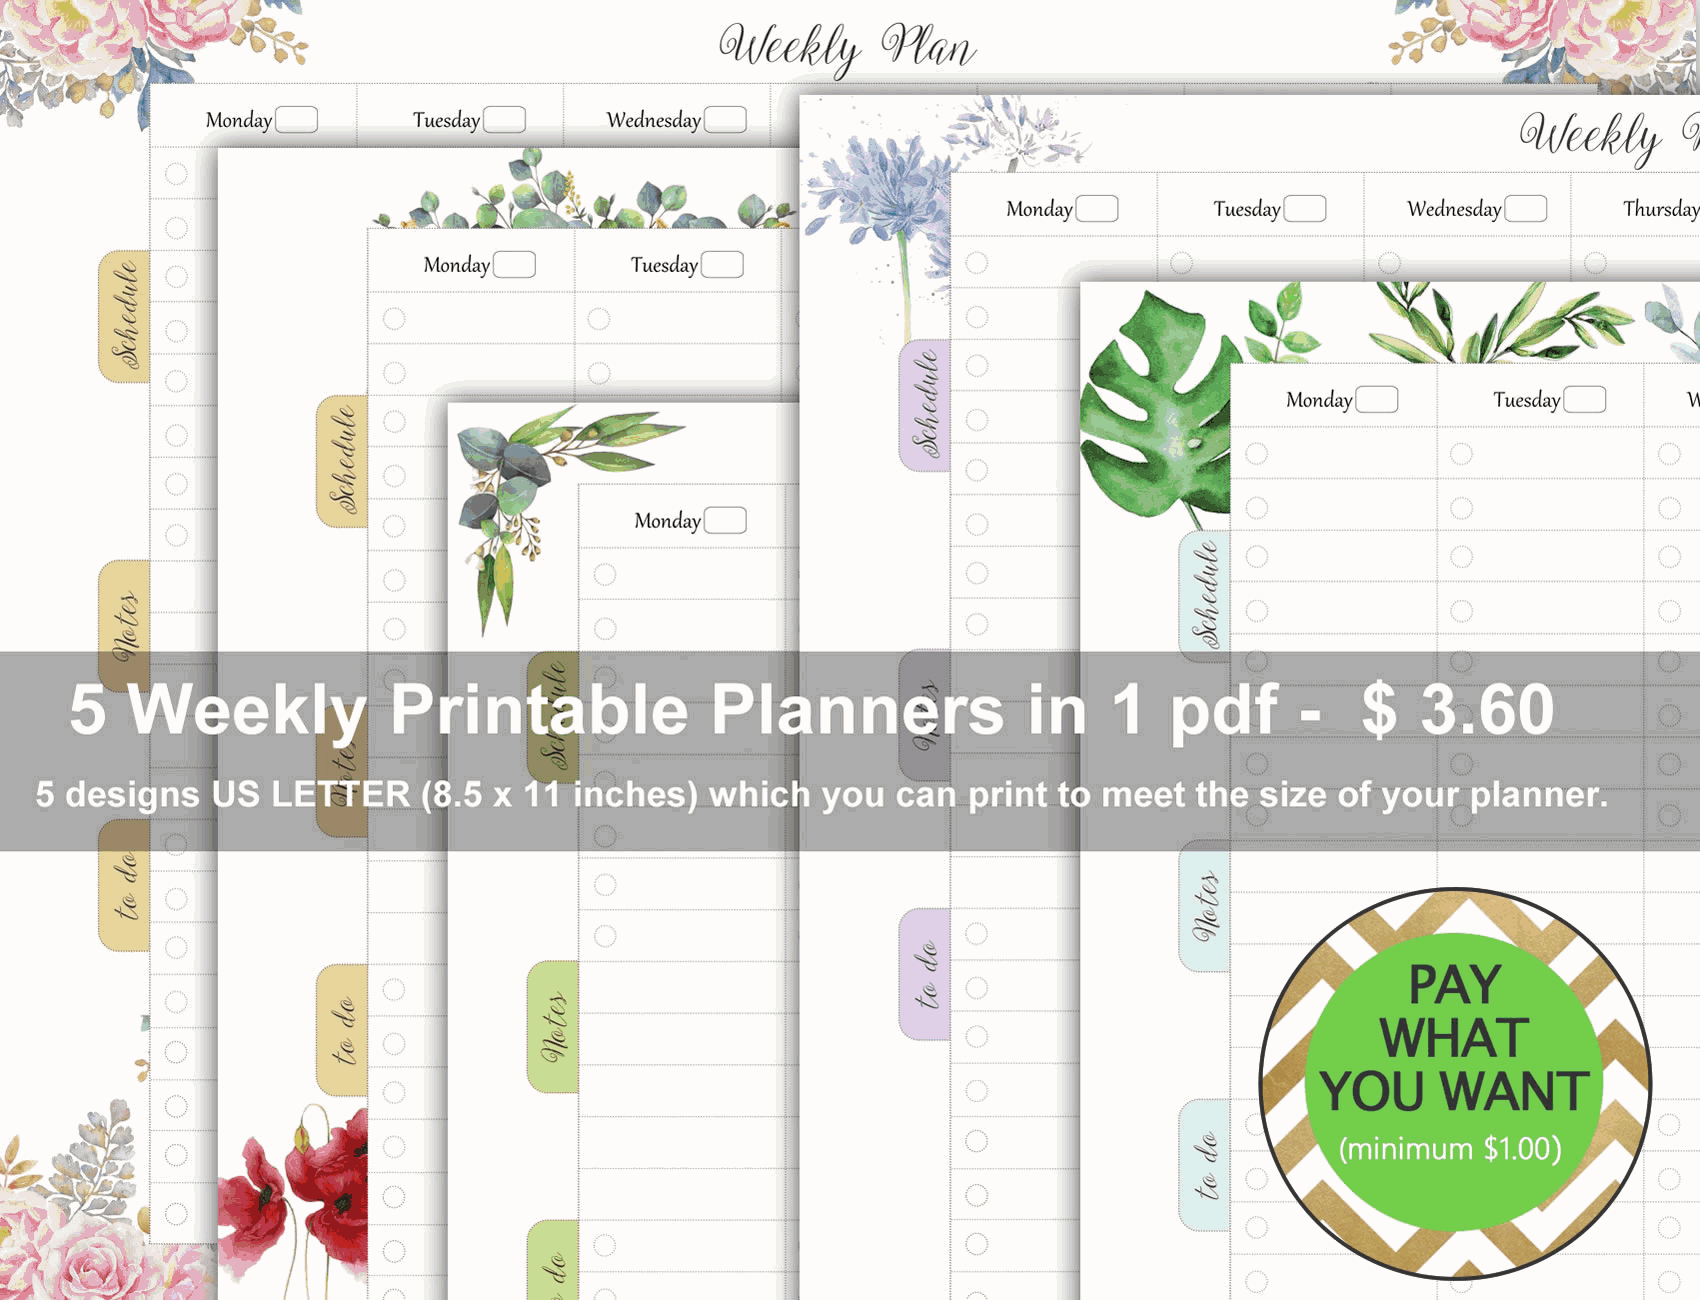 5 Weekly Printable Planners in 1 pdf - Printable Weekly Planner Set. This set includes 5 designs US LETTER (8.5 x 11 inches) which you can print to meet the size of your planner.